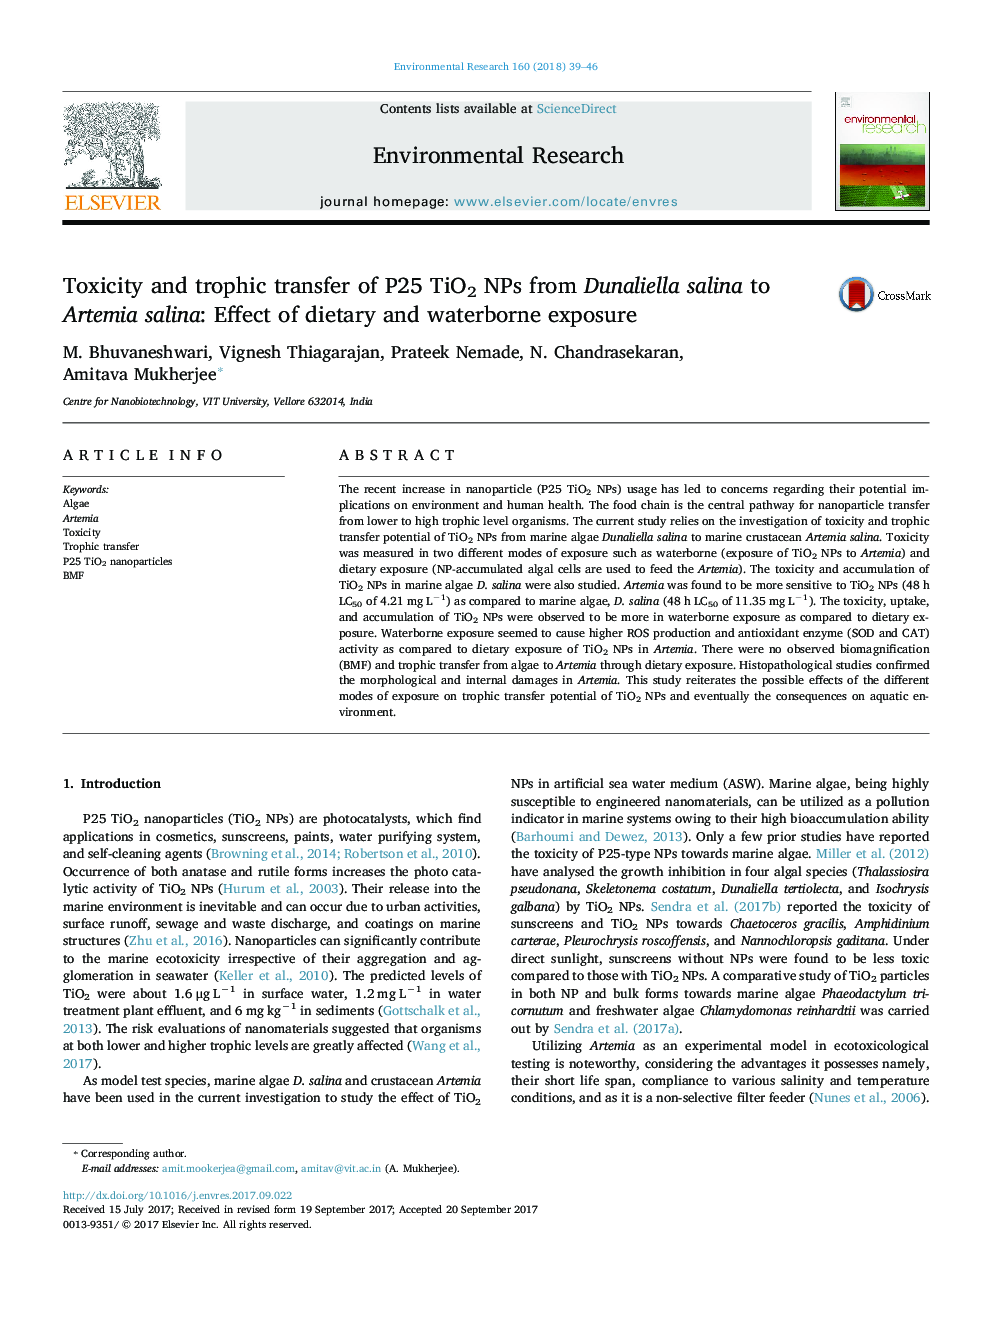 Toxicity and trophic transfer of P25 TiO2 NPs from Dunaliella salina to Artemia salina: Effect of dietary and waterborne exposure